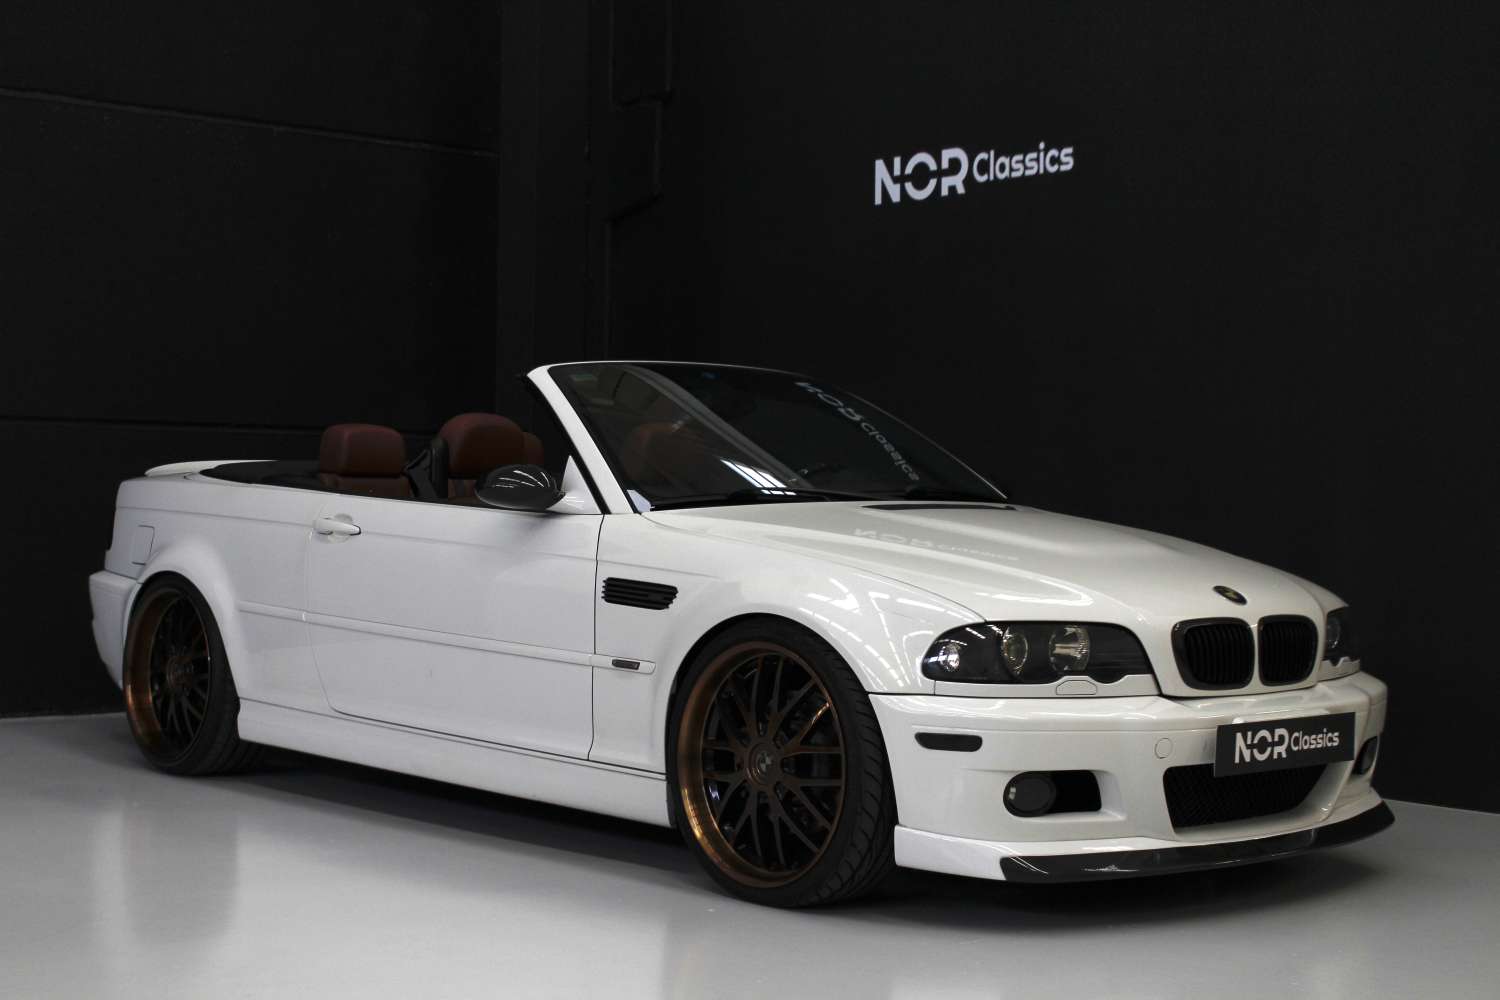 BMW E46 M3 cabriolet manual “customized” 2002 reserved